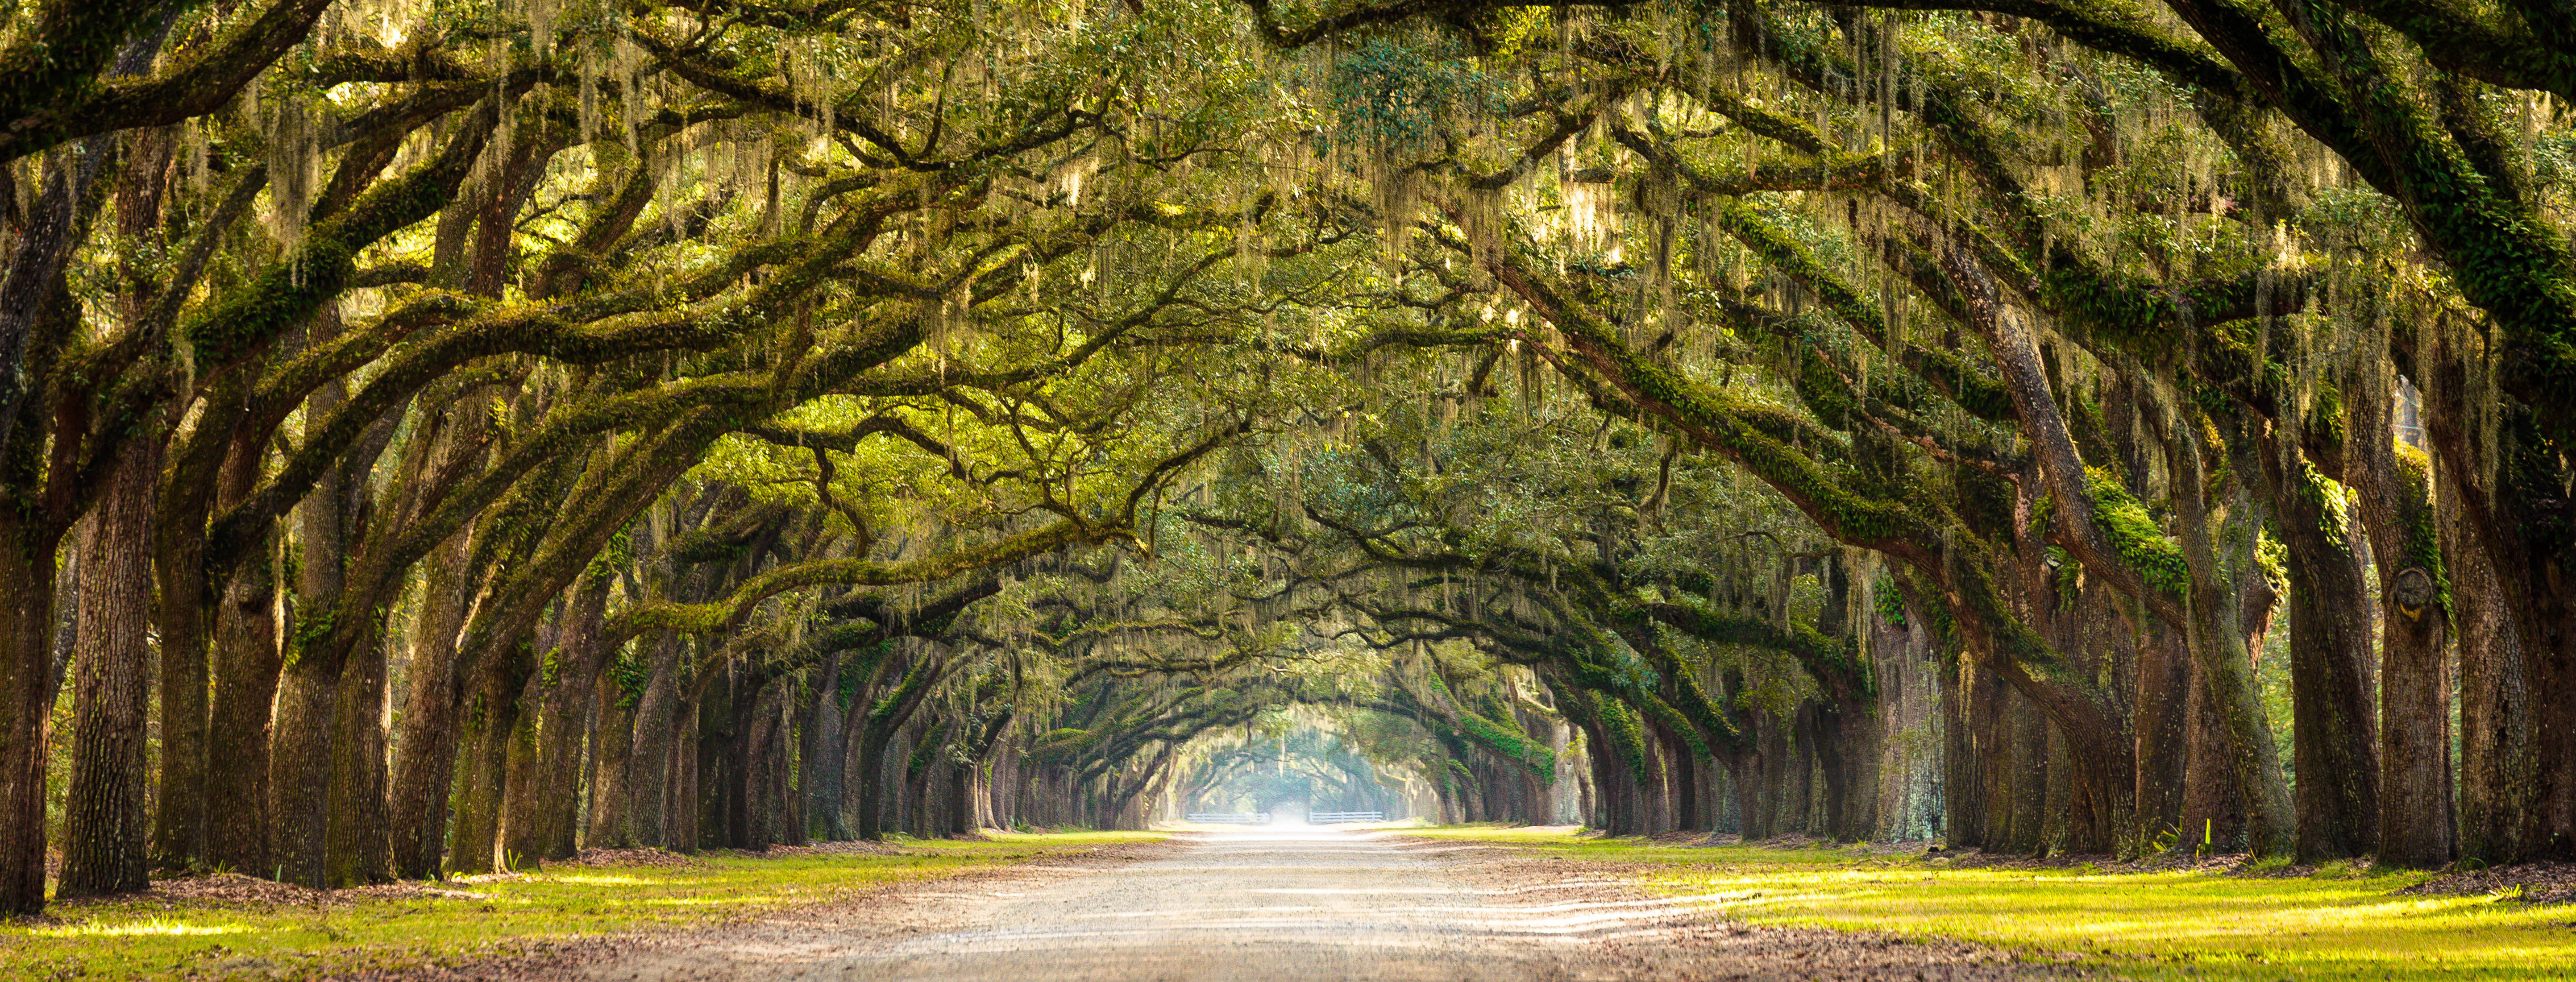 Road lined with ancient live oak trees